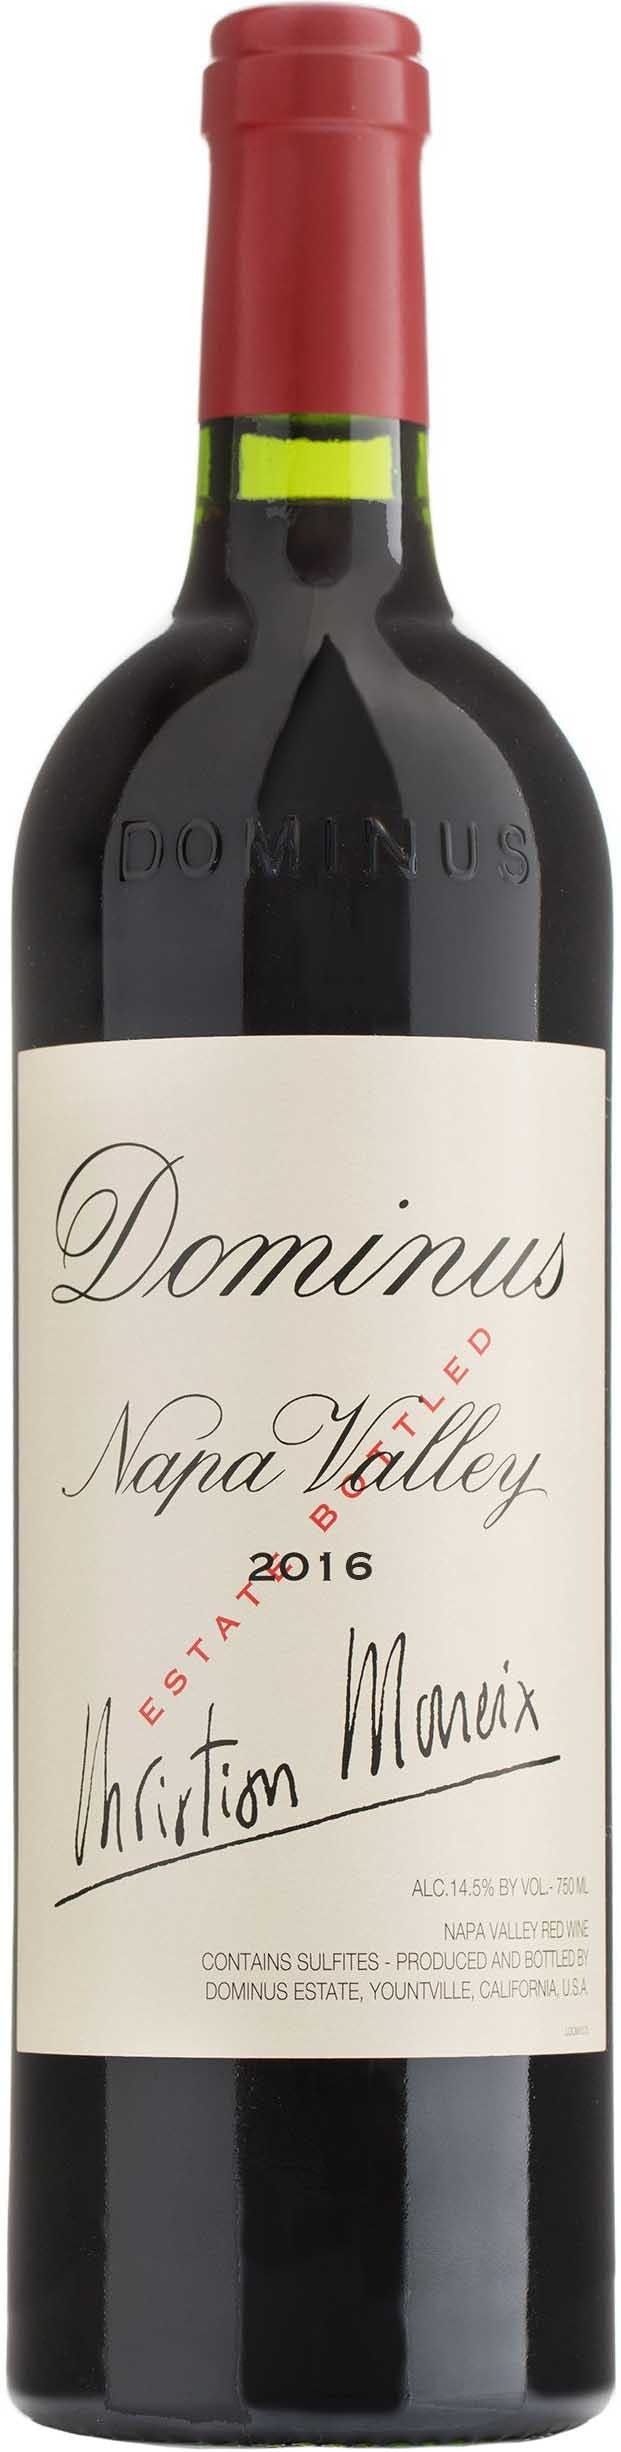 Dominus Napa Valley Red 2014 750ml Stirling Fine Wines